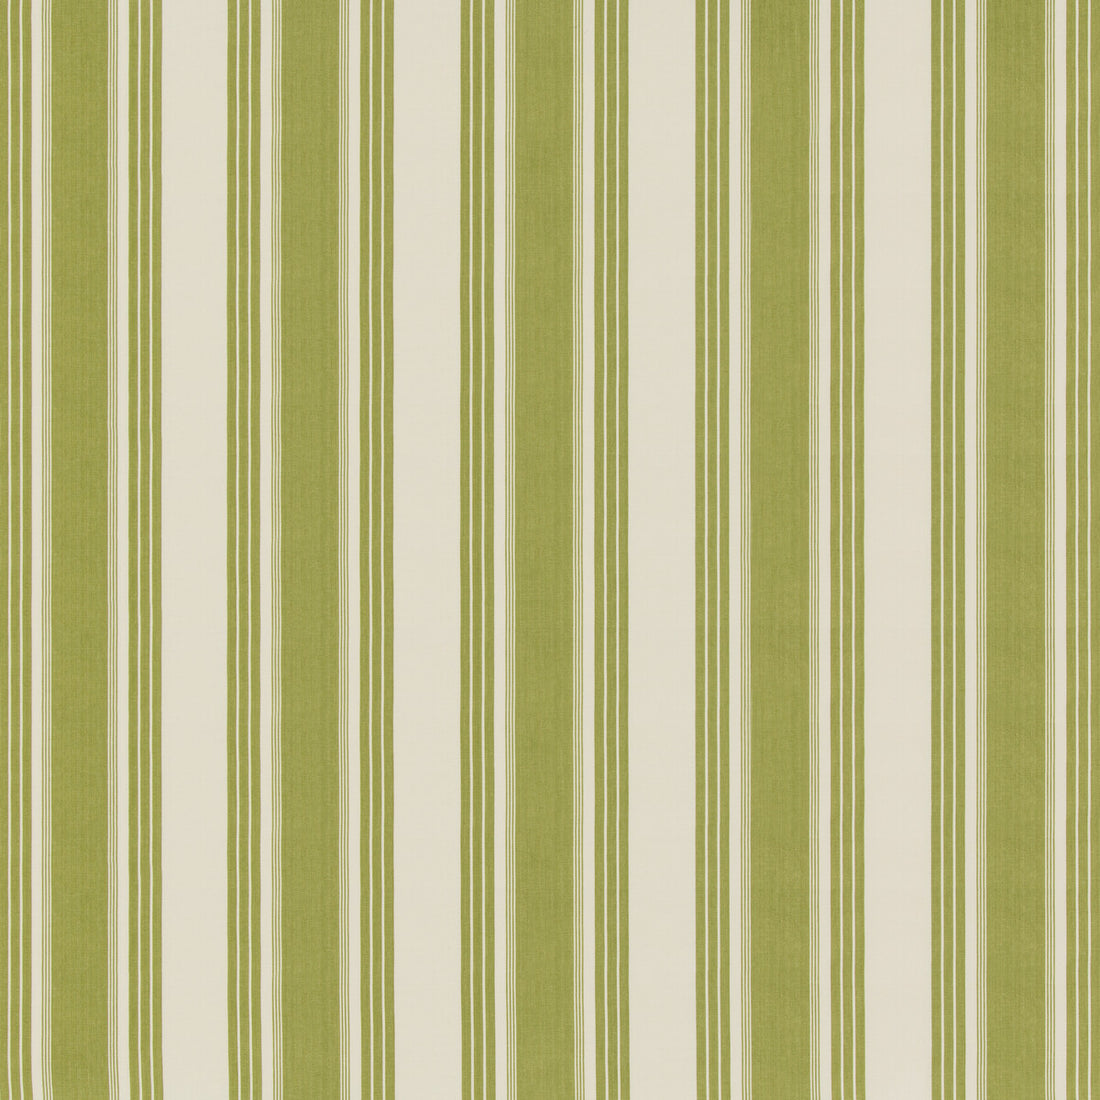 Colmar Stripe fabric in leaf color - pattern 8019110.3.0 - by Brunschwig &amp; Fils in the Folio Francais collection